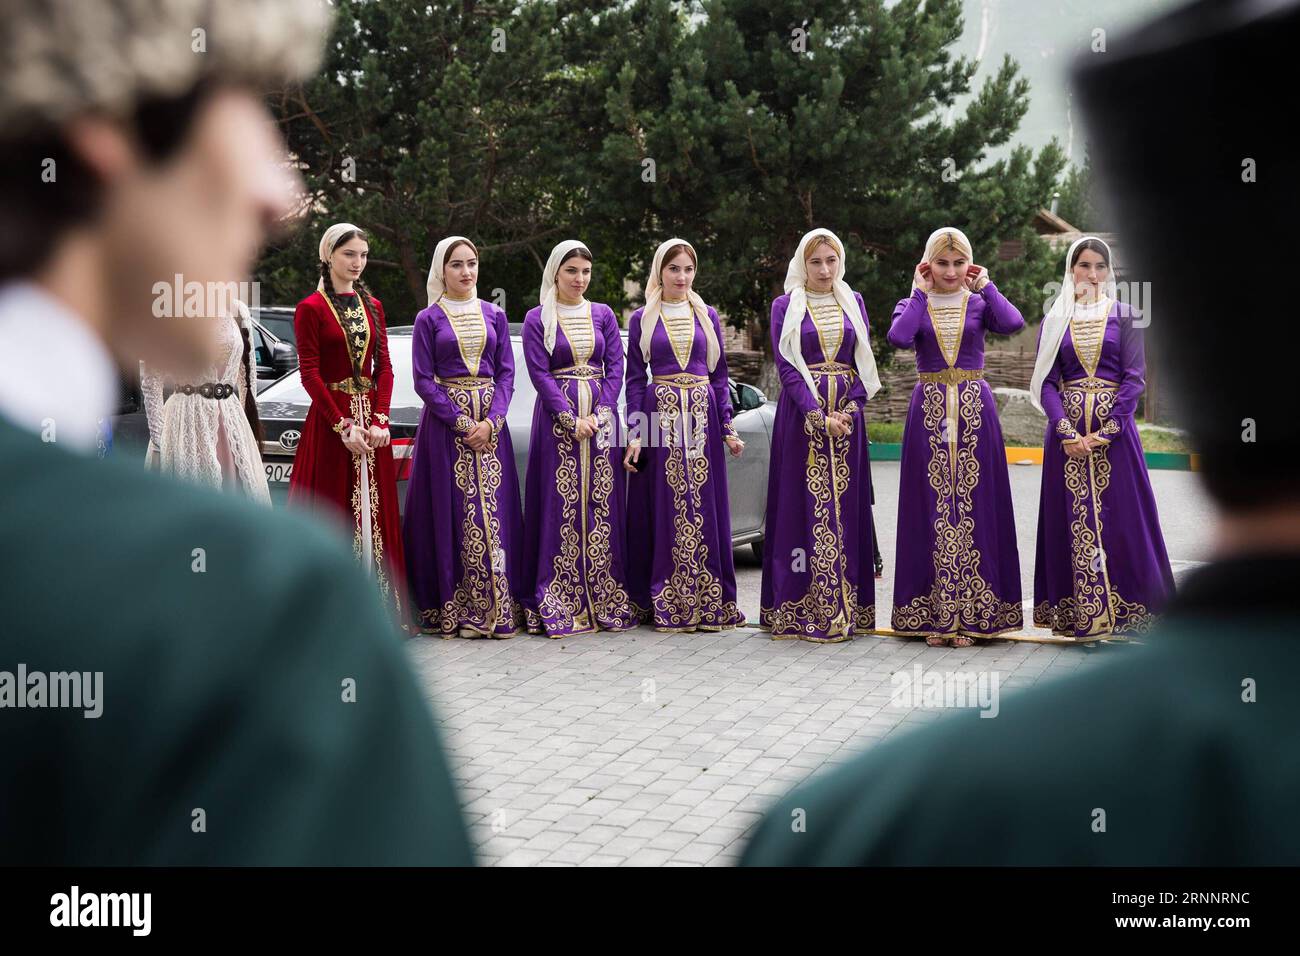 (170727) -- CHECHNYA, July 27, 2017 -- Girls line up to welcome guests in Vedensky District, Chechnya, Russia, July 25, 2017. ) (zw) RUSSIA-CHECHNYA-DAILY LIFE BaixXueqi PUBLICATIONxNOTxINxCHN   Chechnya July 27 2017 Girls Line up to Welcome Guests in  District Chechnya Russia July 25 2017 ZW Russia Chechnya Daily Life BaixXueqi PUBLICATIONxNOTxINxCHN Stock Photo